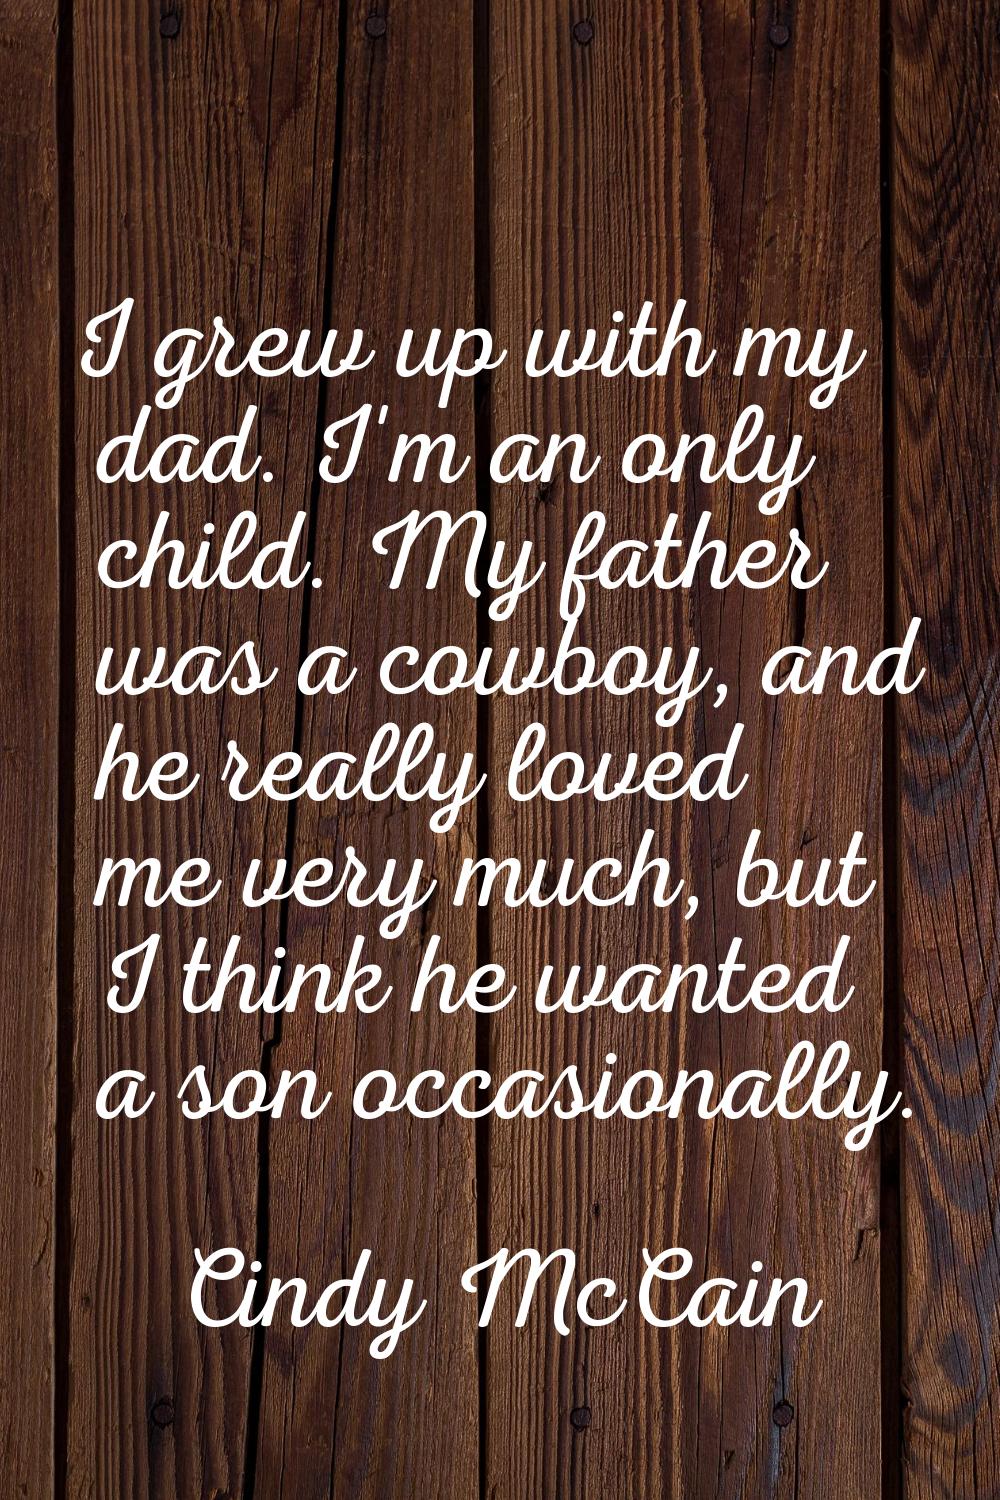 I grew up with my dad. I'm an only child. My father was a cowboy, and he really loved me very much,